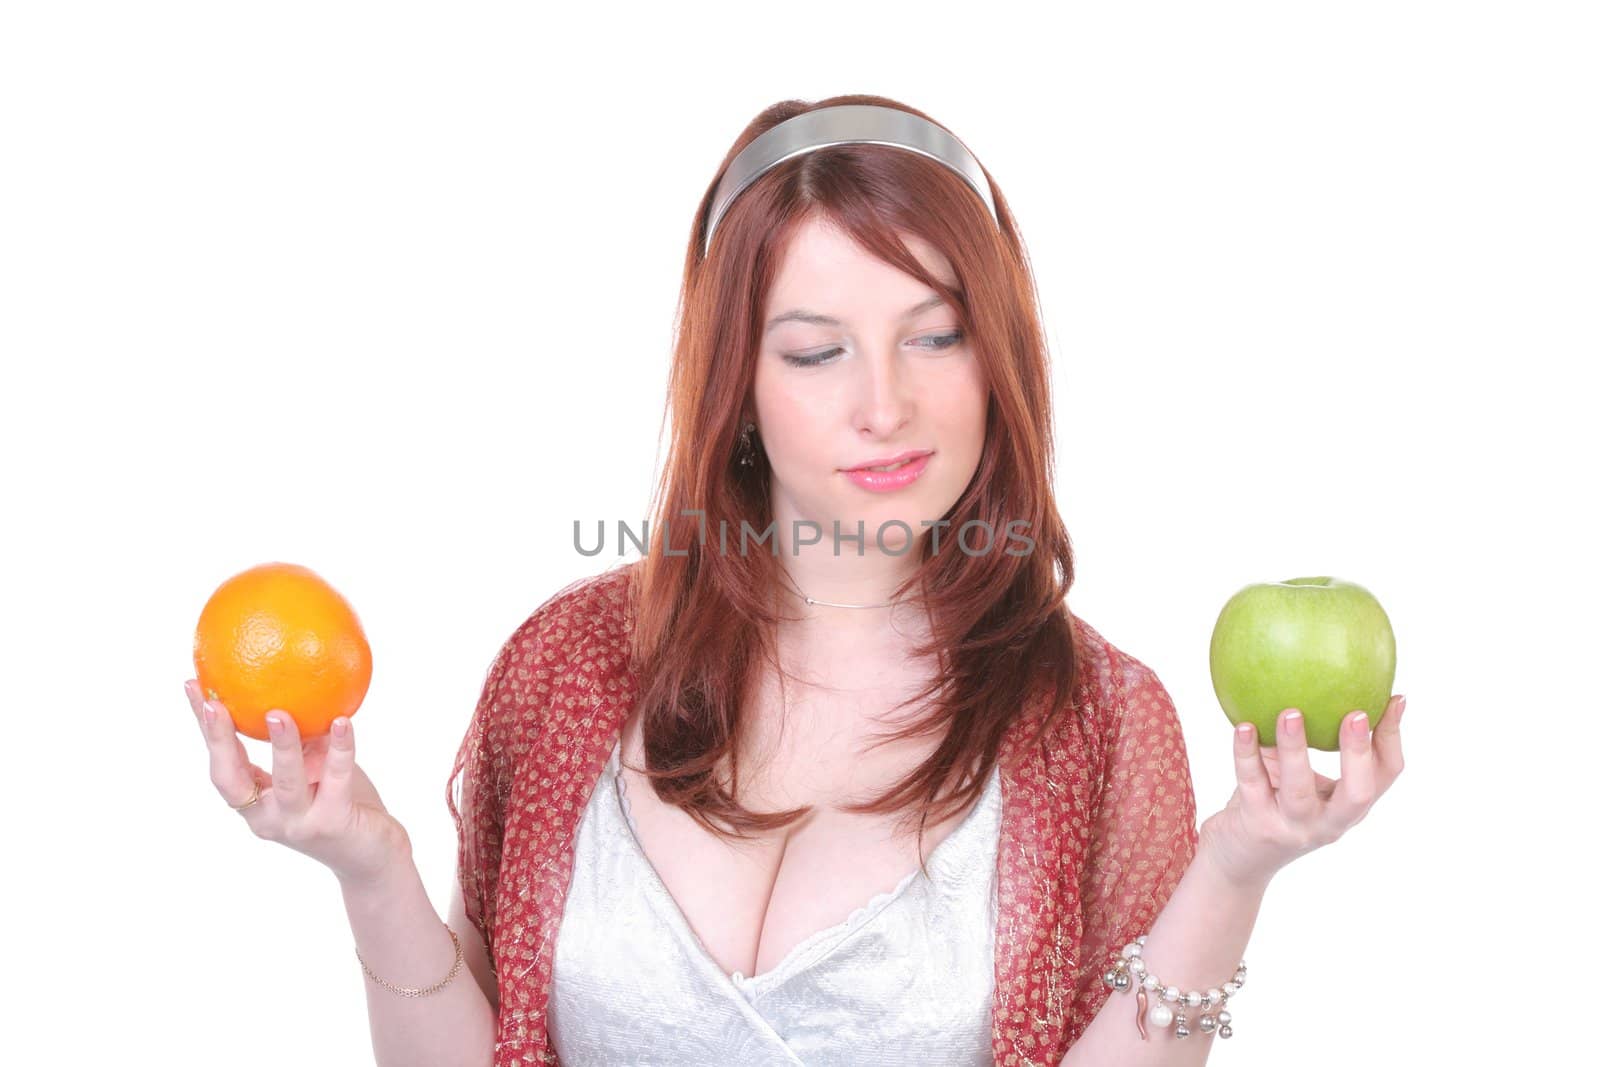  Pretty woman with green apple and orange, with copy-space